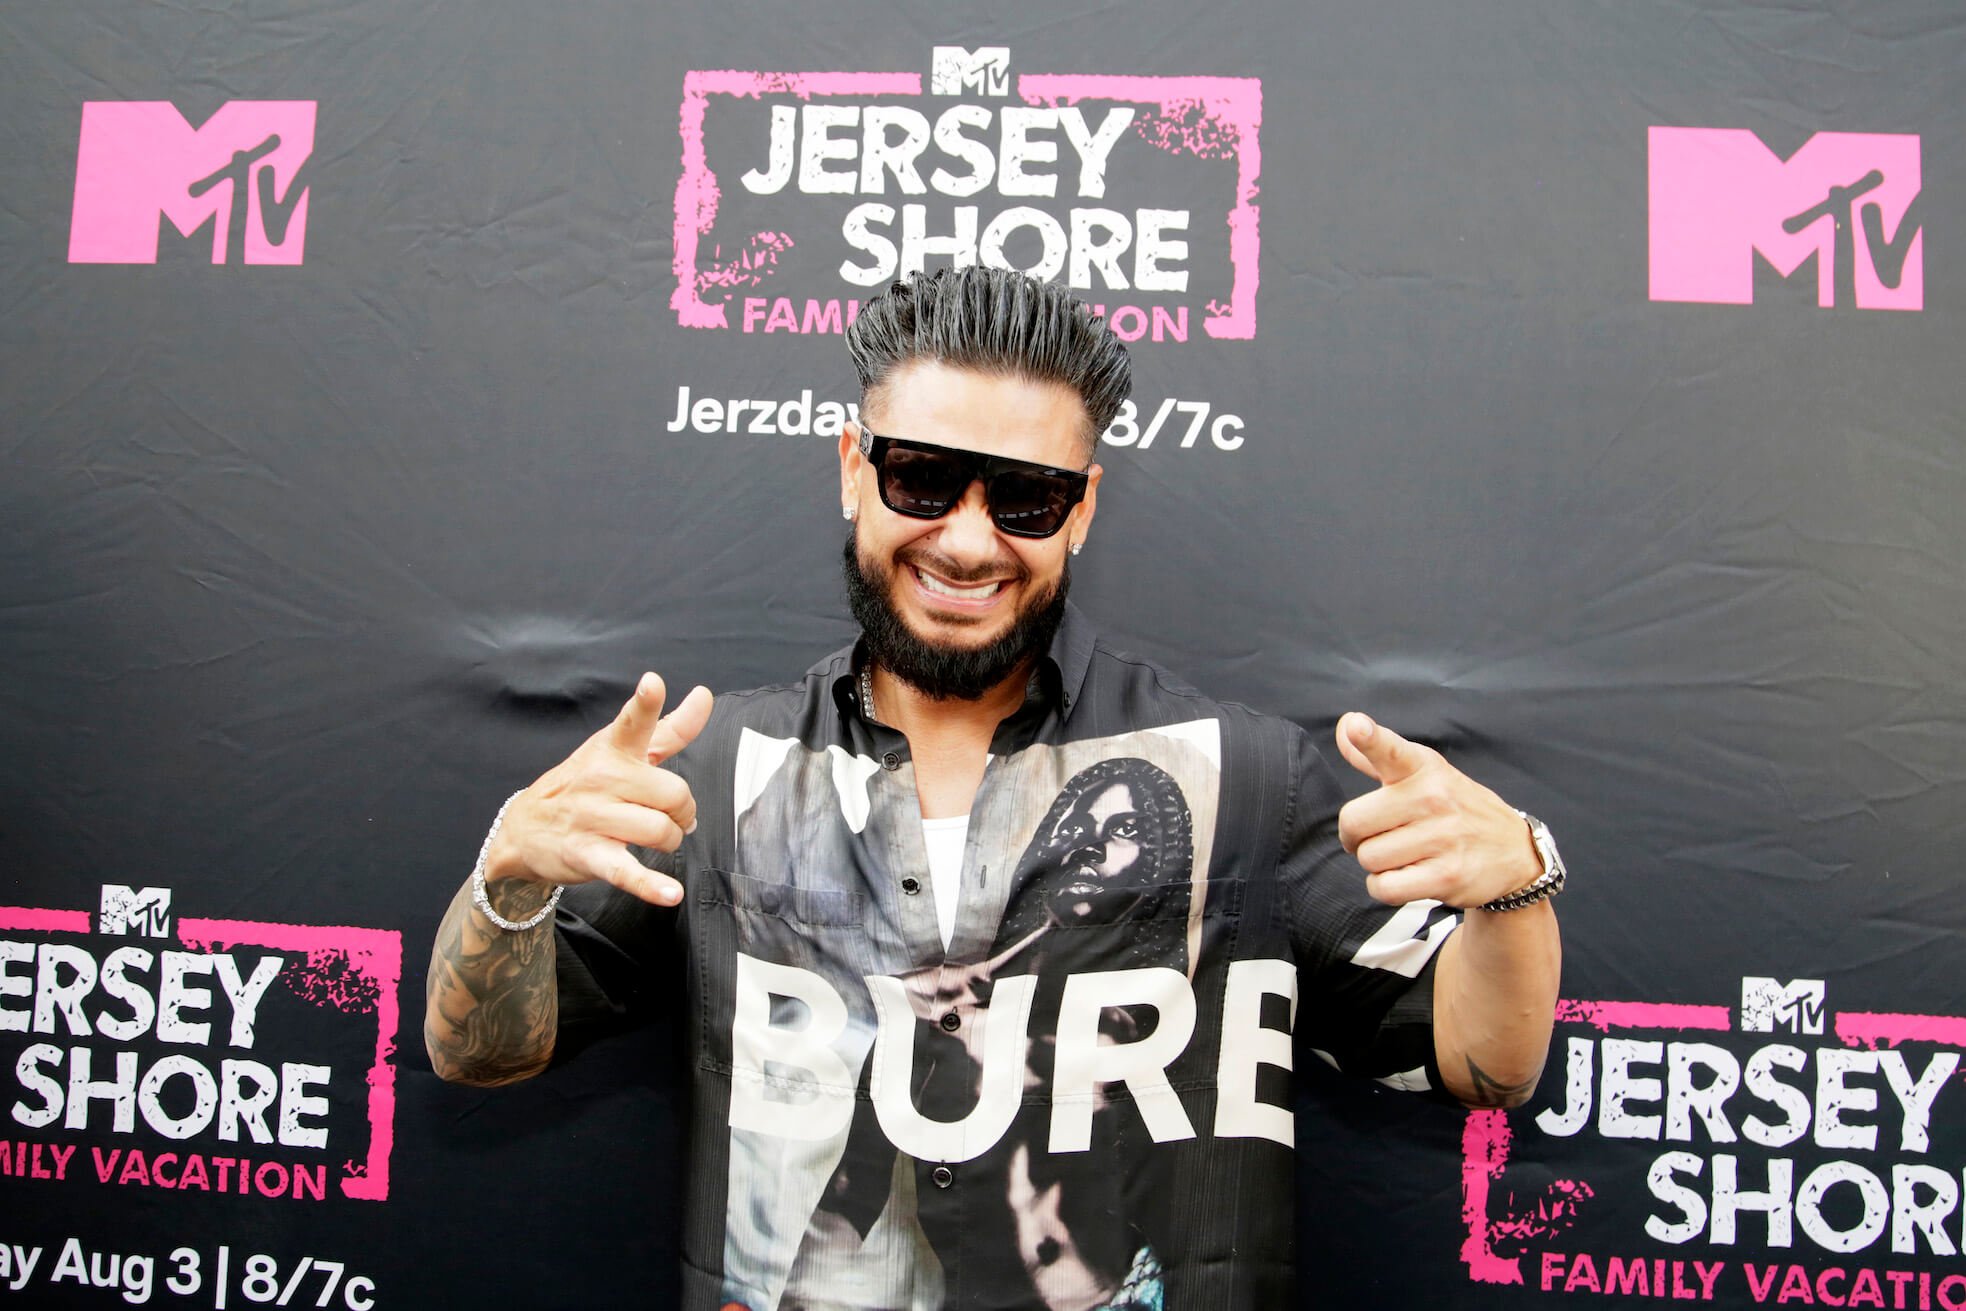 'Jersey Shore: Family Vacation' Season 7 star DJ Pauly D smiling and gesturing at an MTV event